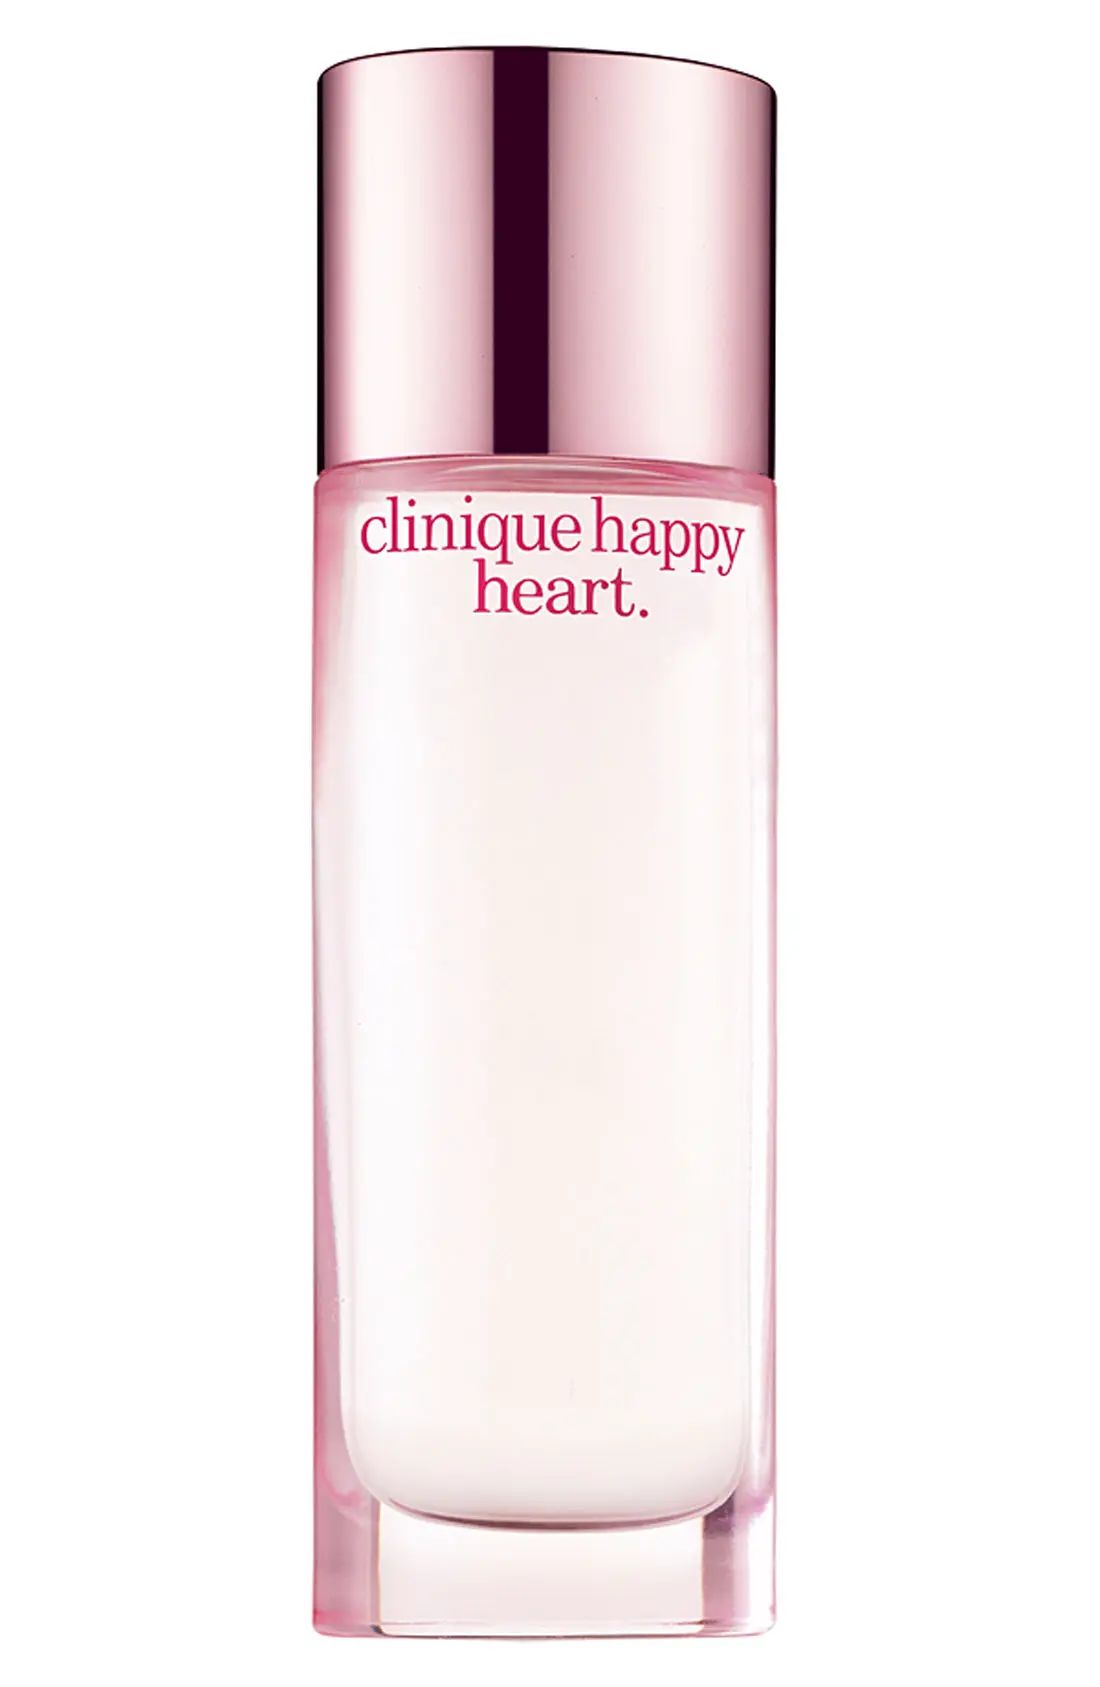 Clinique Happy Heart Spray at Nordstrom, Size 3.4 Oz | Nordstrom